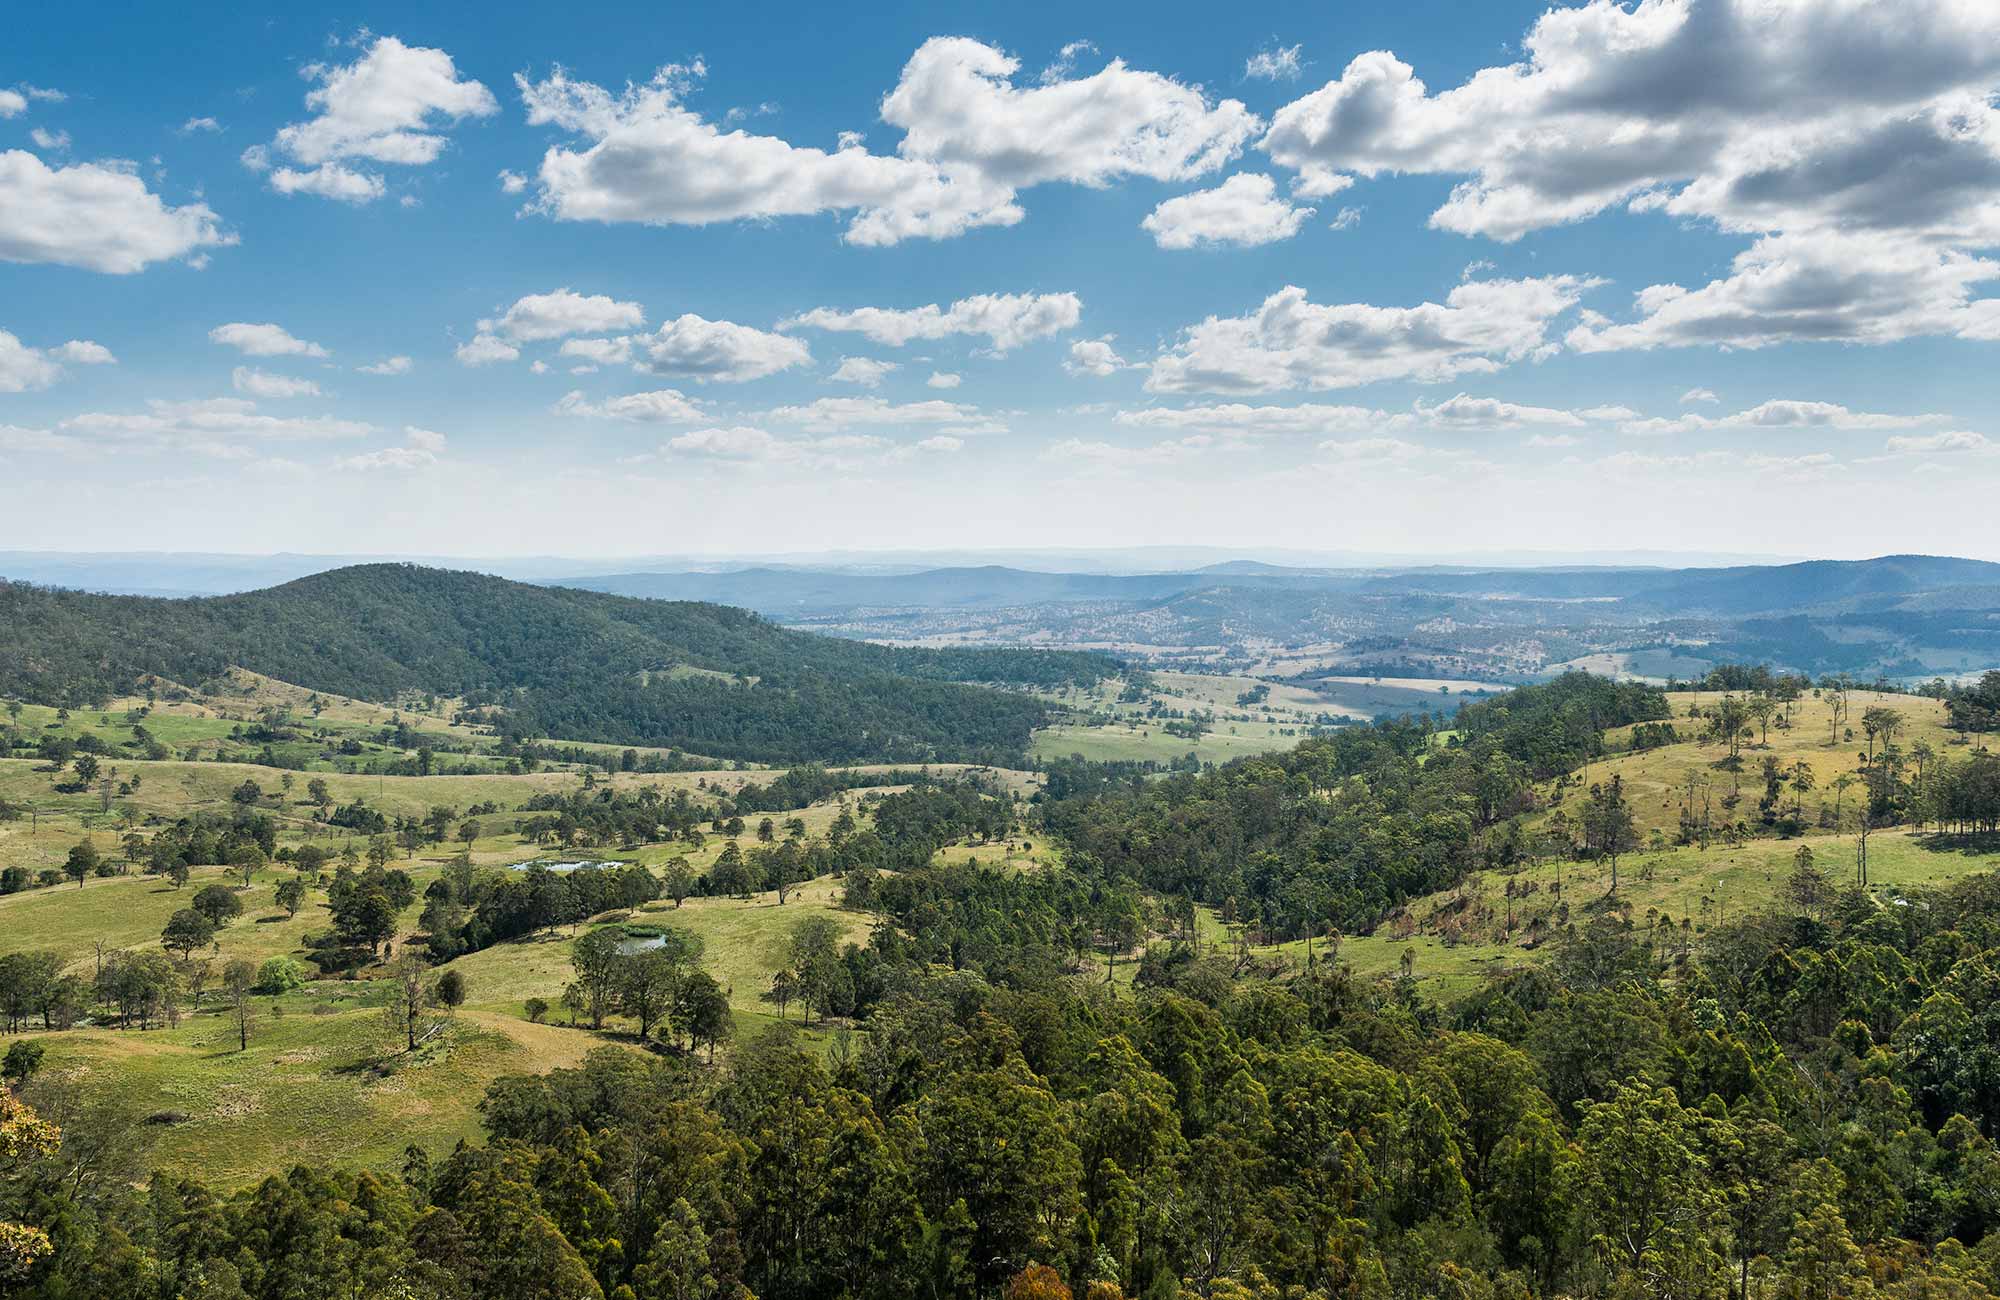 Tooloom lookout, Tooloom Nature reserve. Photo: David Young